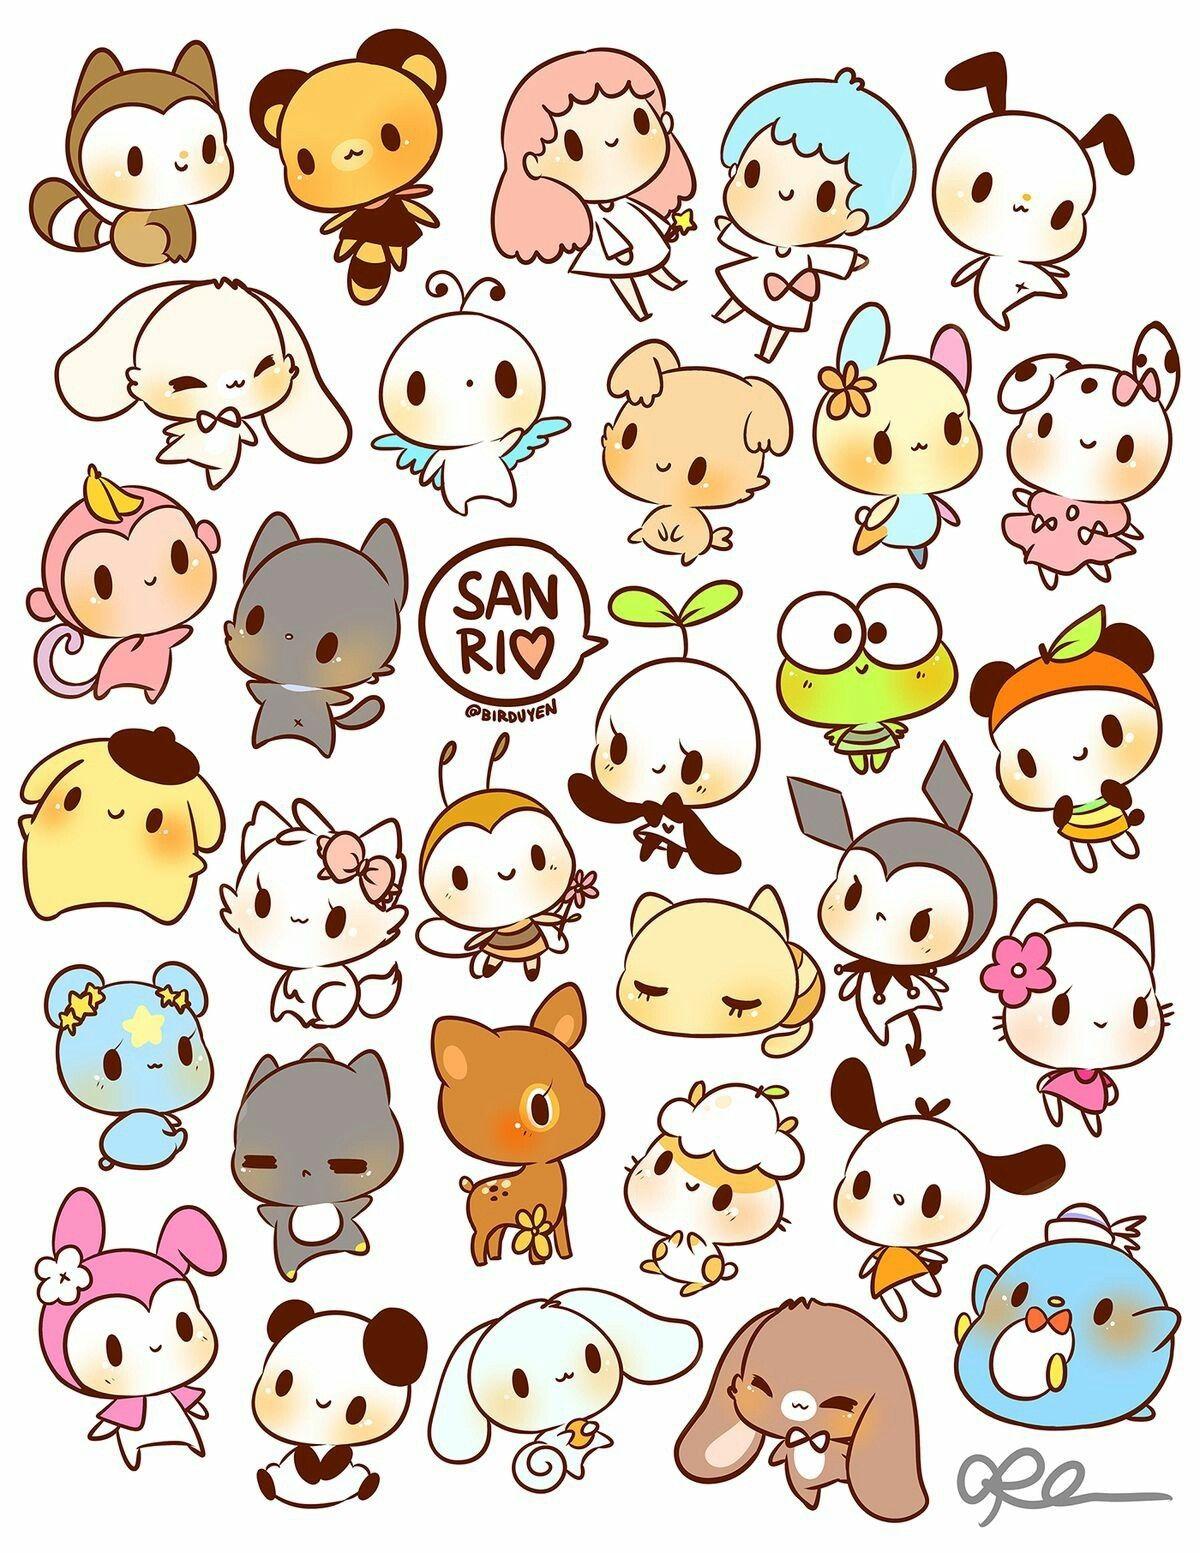 A drawing of many different Sanrio characters. - Keroppi